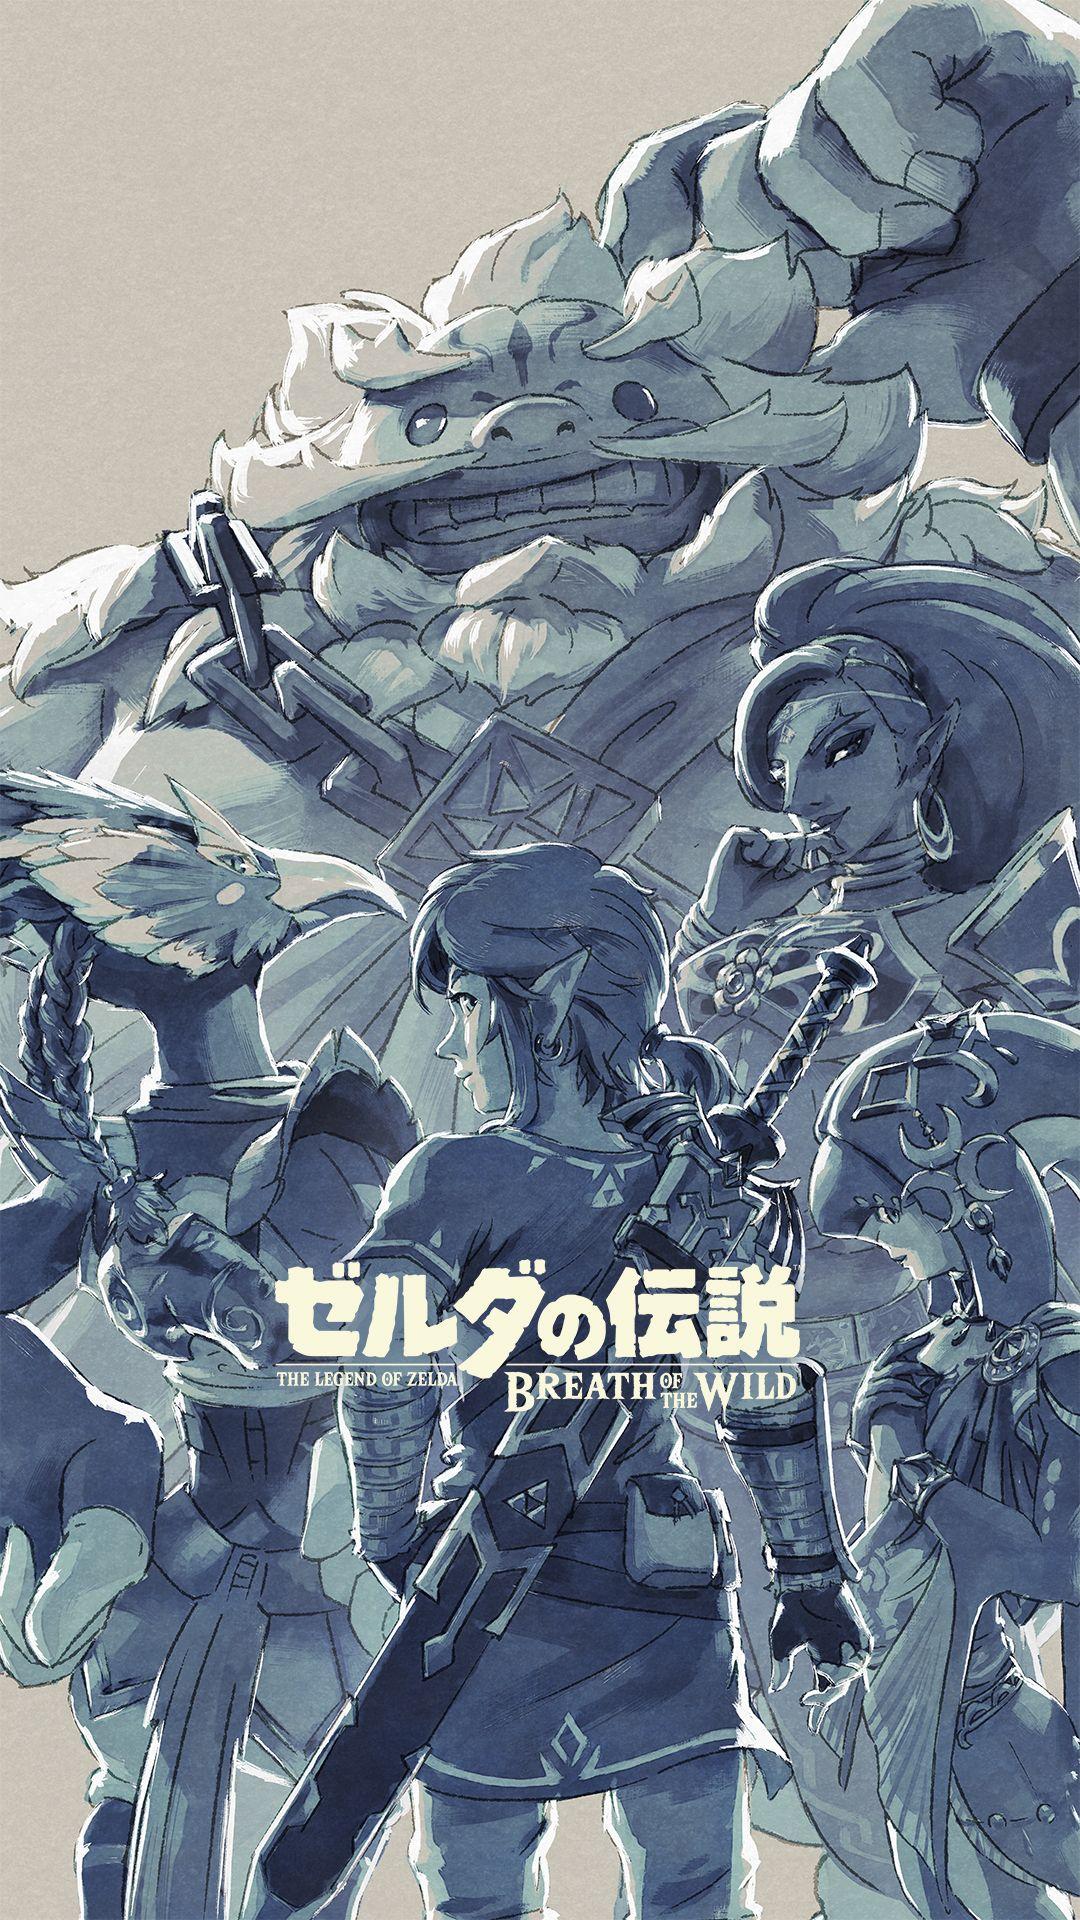 Nintendo releases new Breath of the Wild wallpaper in celebration of the game's launch